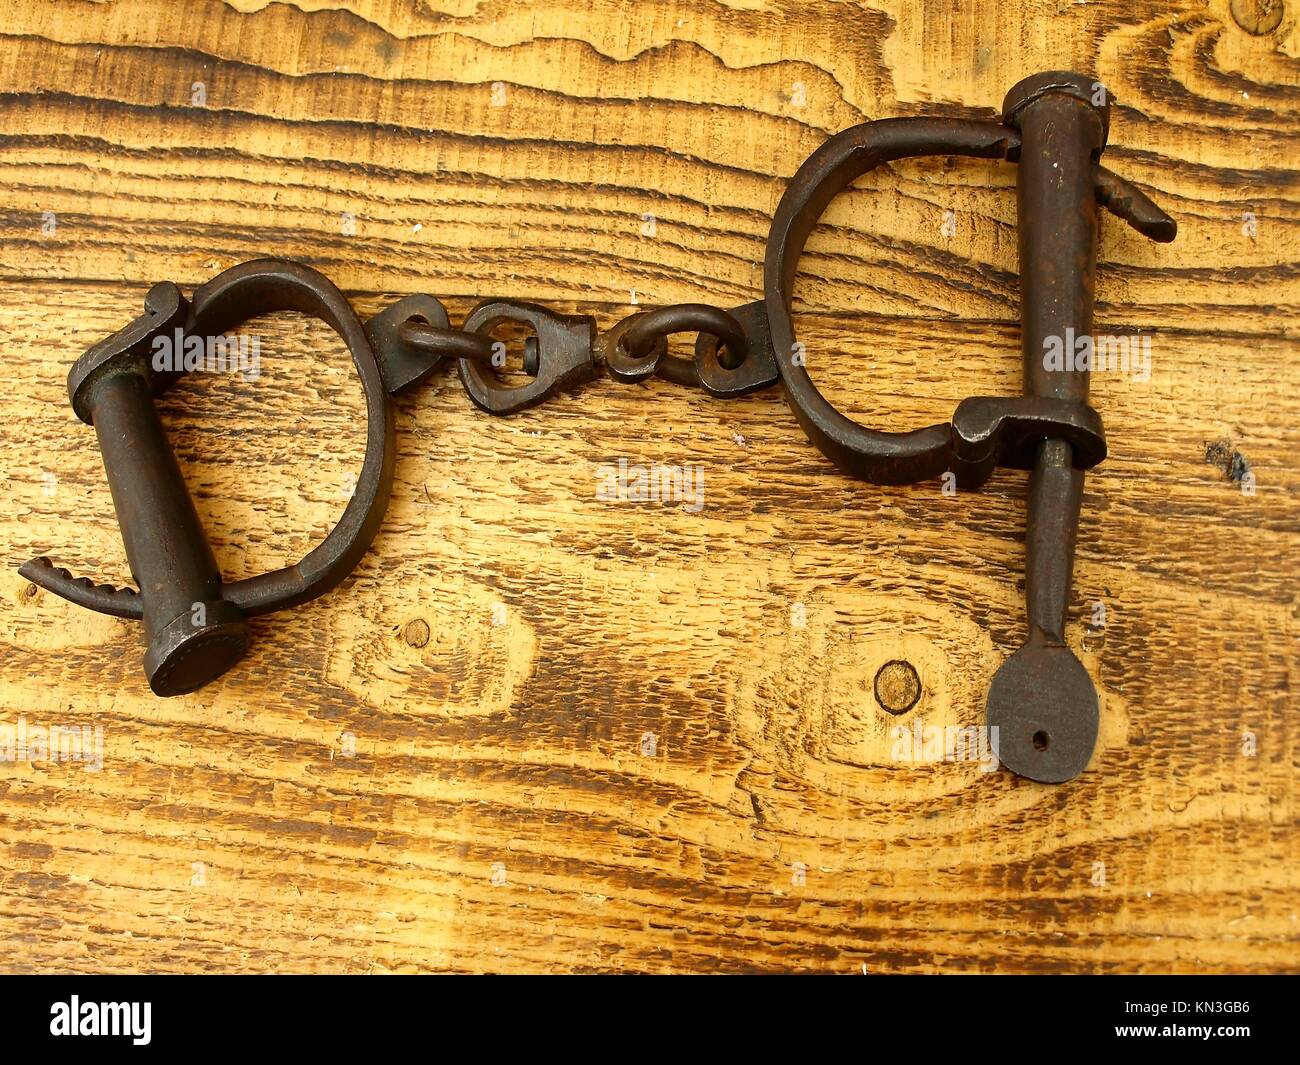 medieval handcuffs. Stock Photo